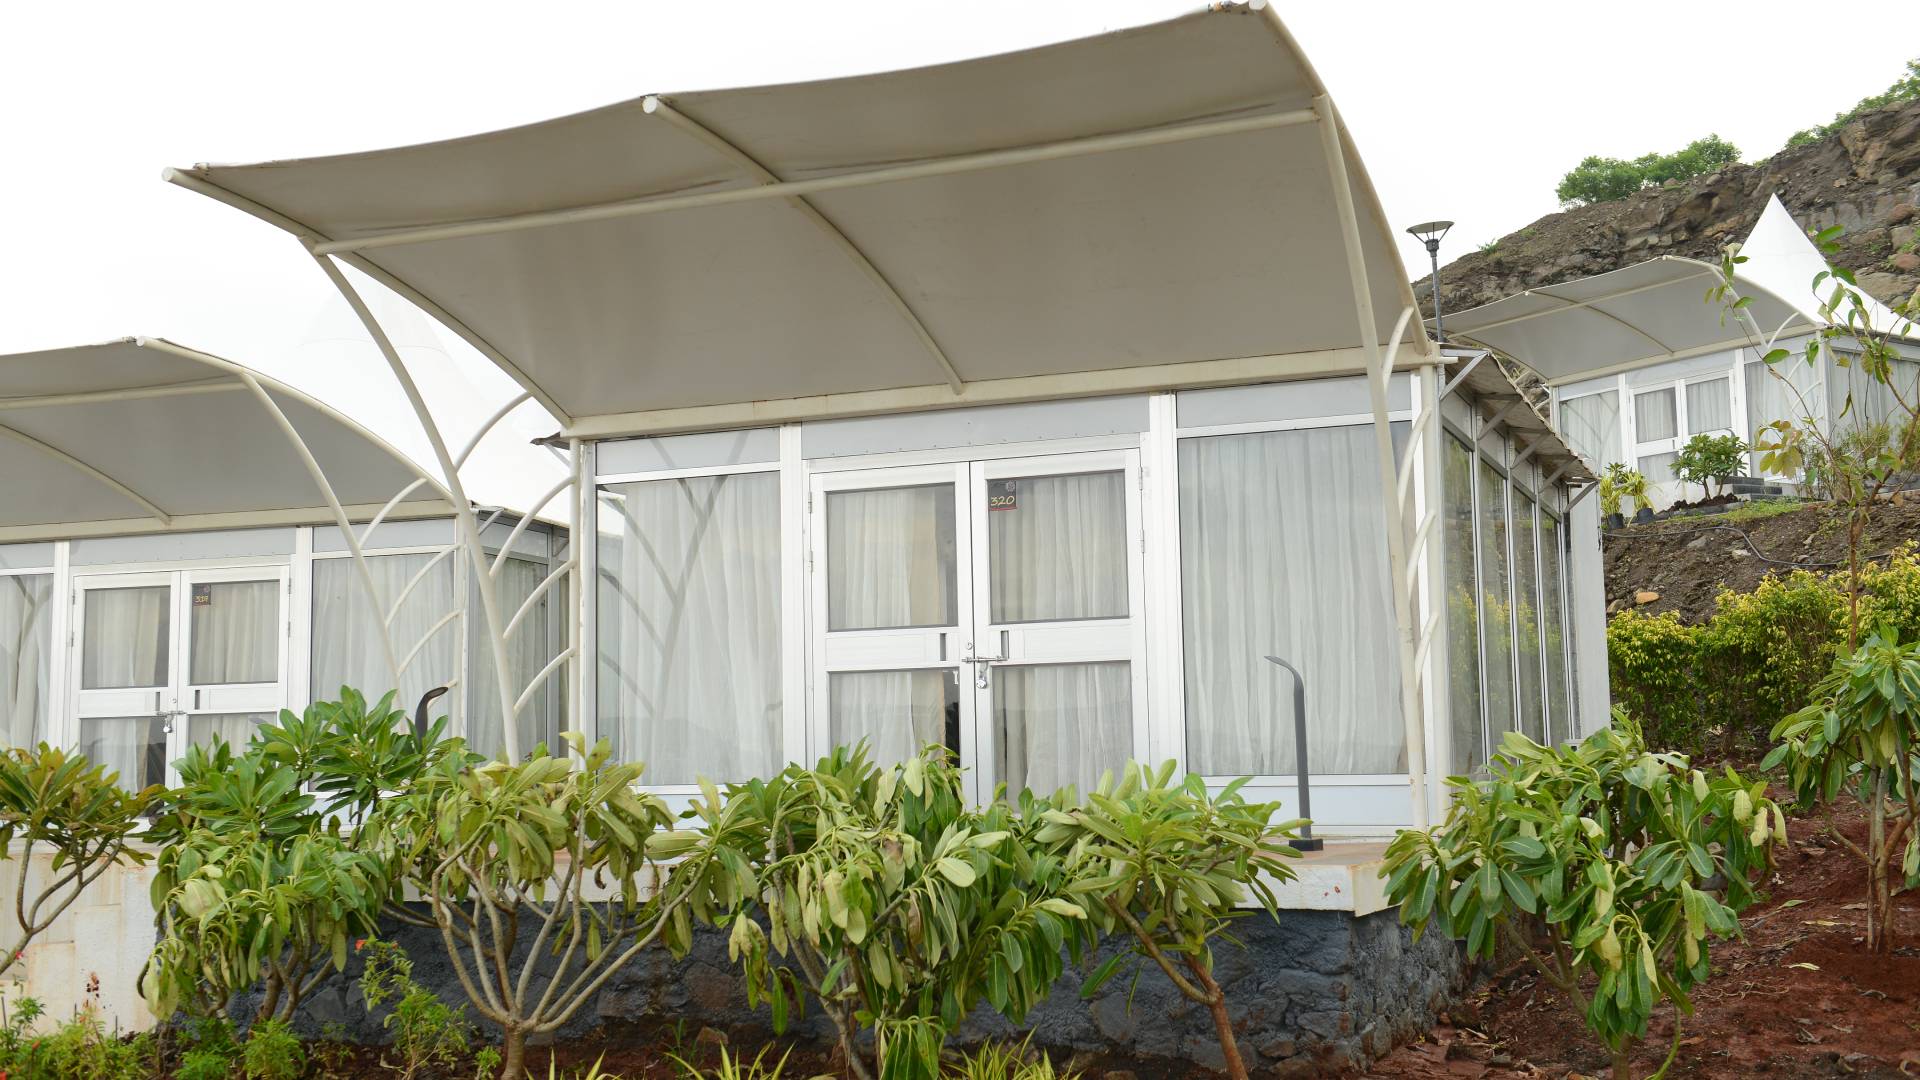 THE TOPAZ AC LUXURIOUS GLASS TENTS at Sunny's World Pune (10)